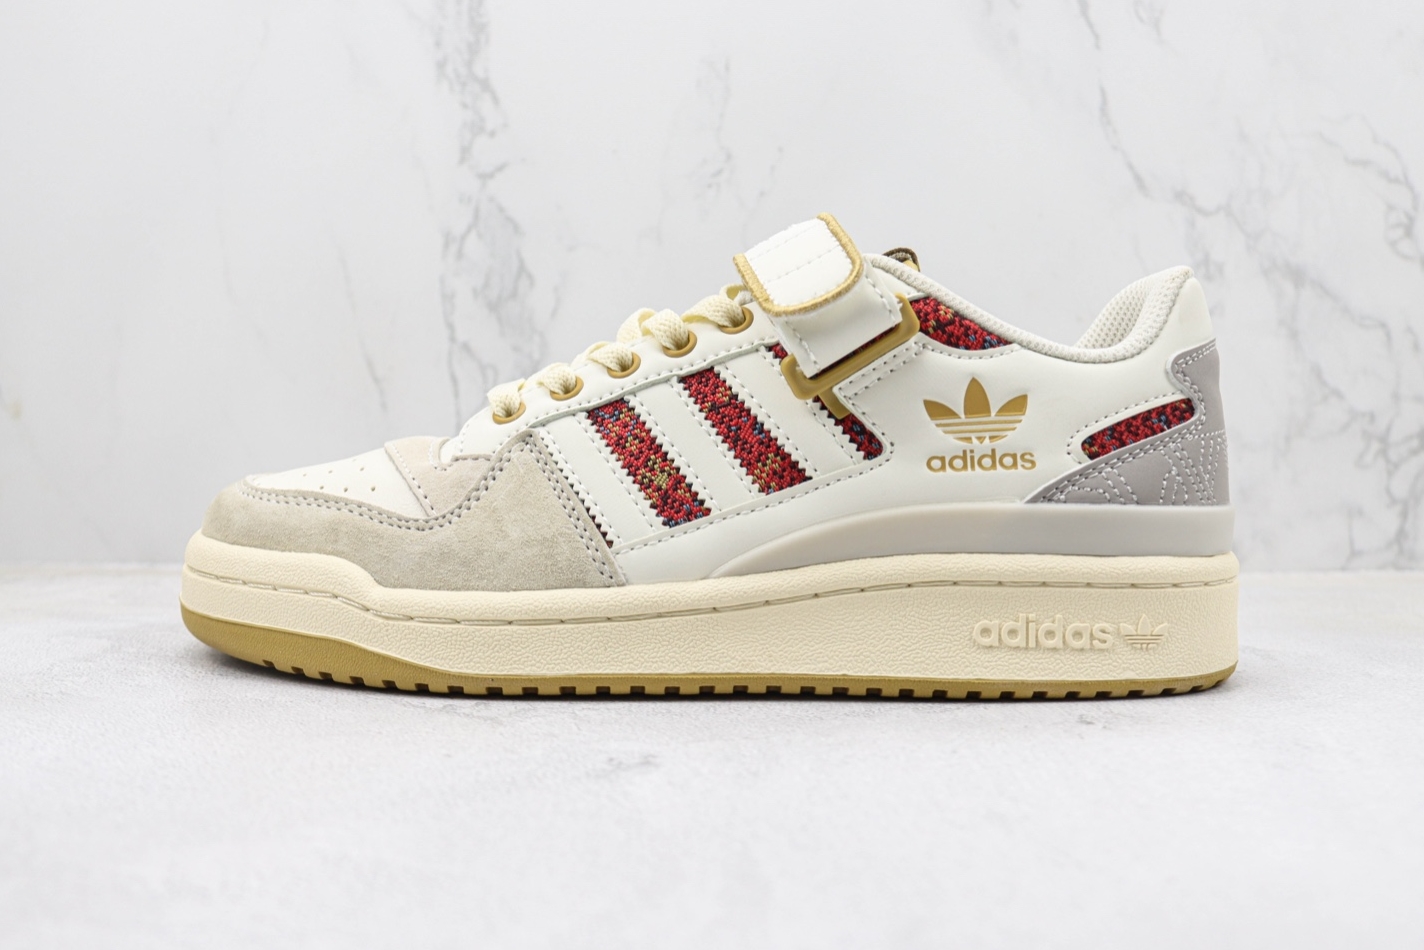 Adidas Originals Forum Low HQ4604 - Iconic Sneakers for Style Seekers